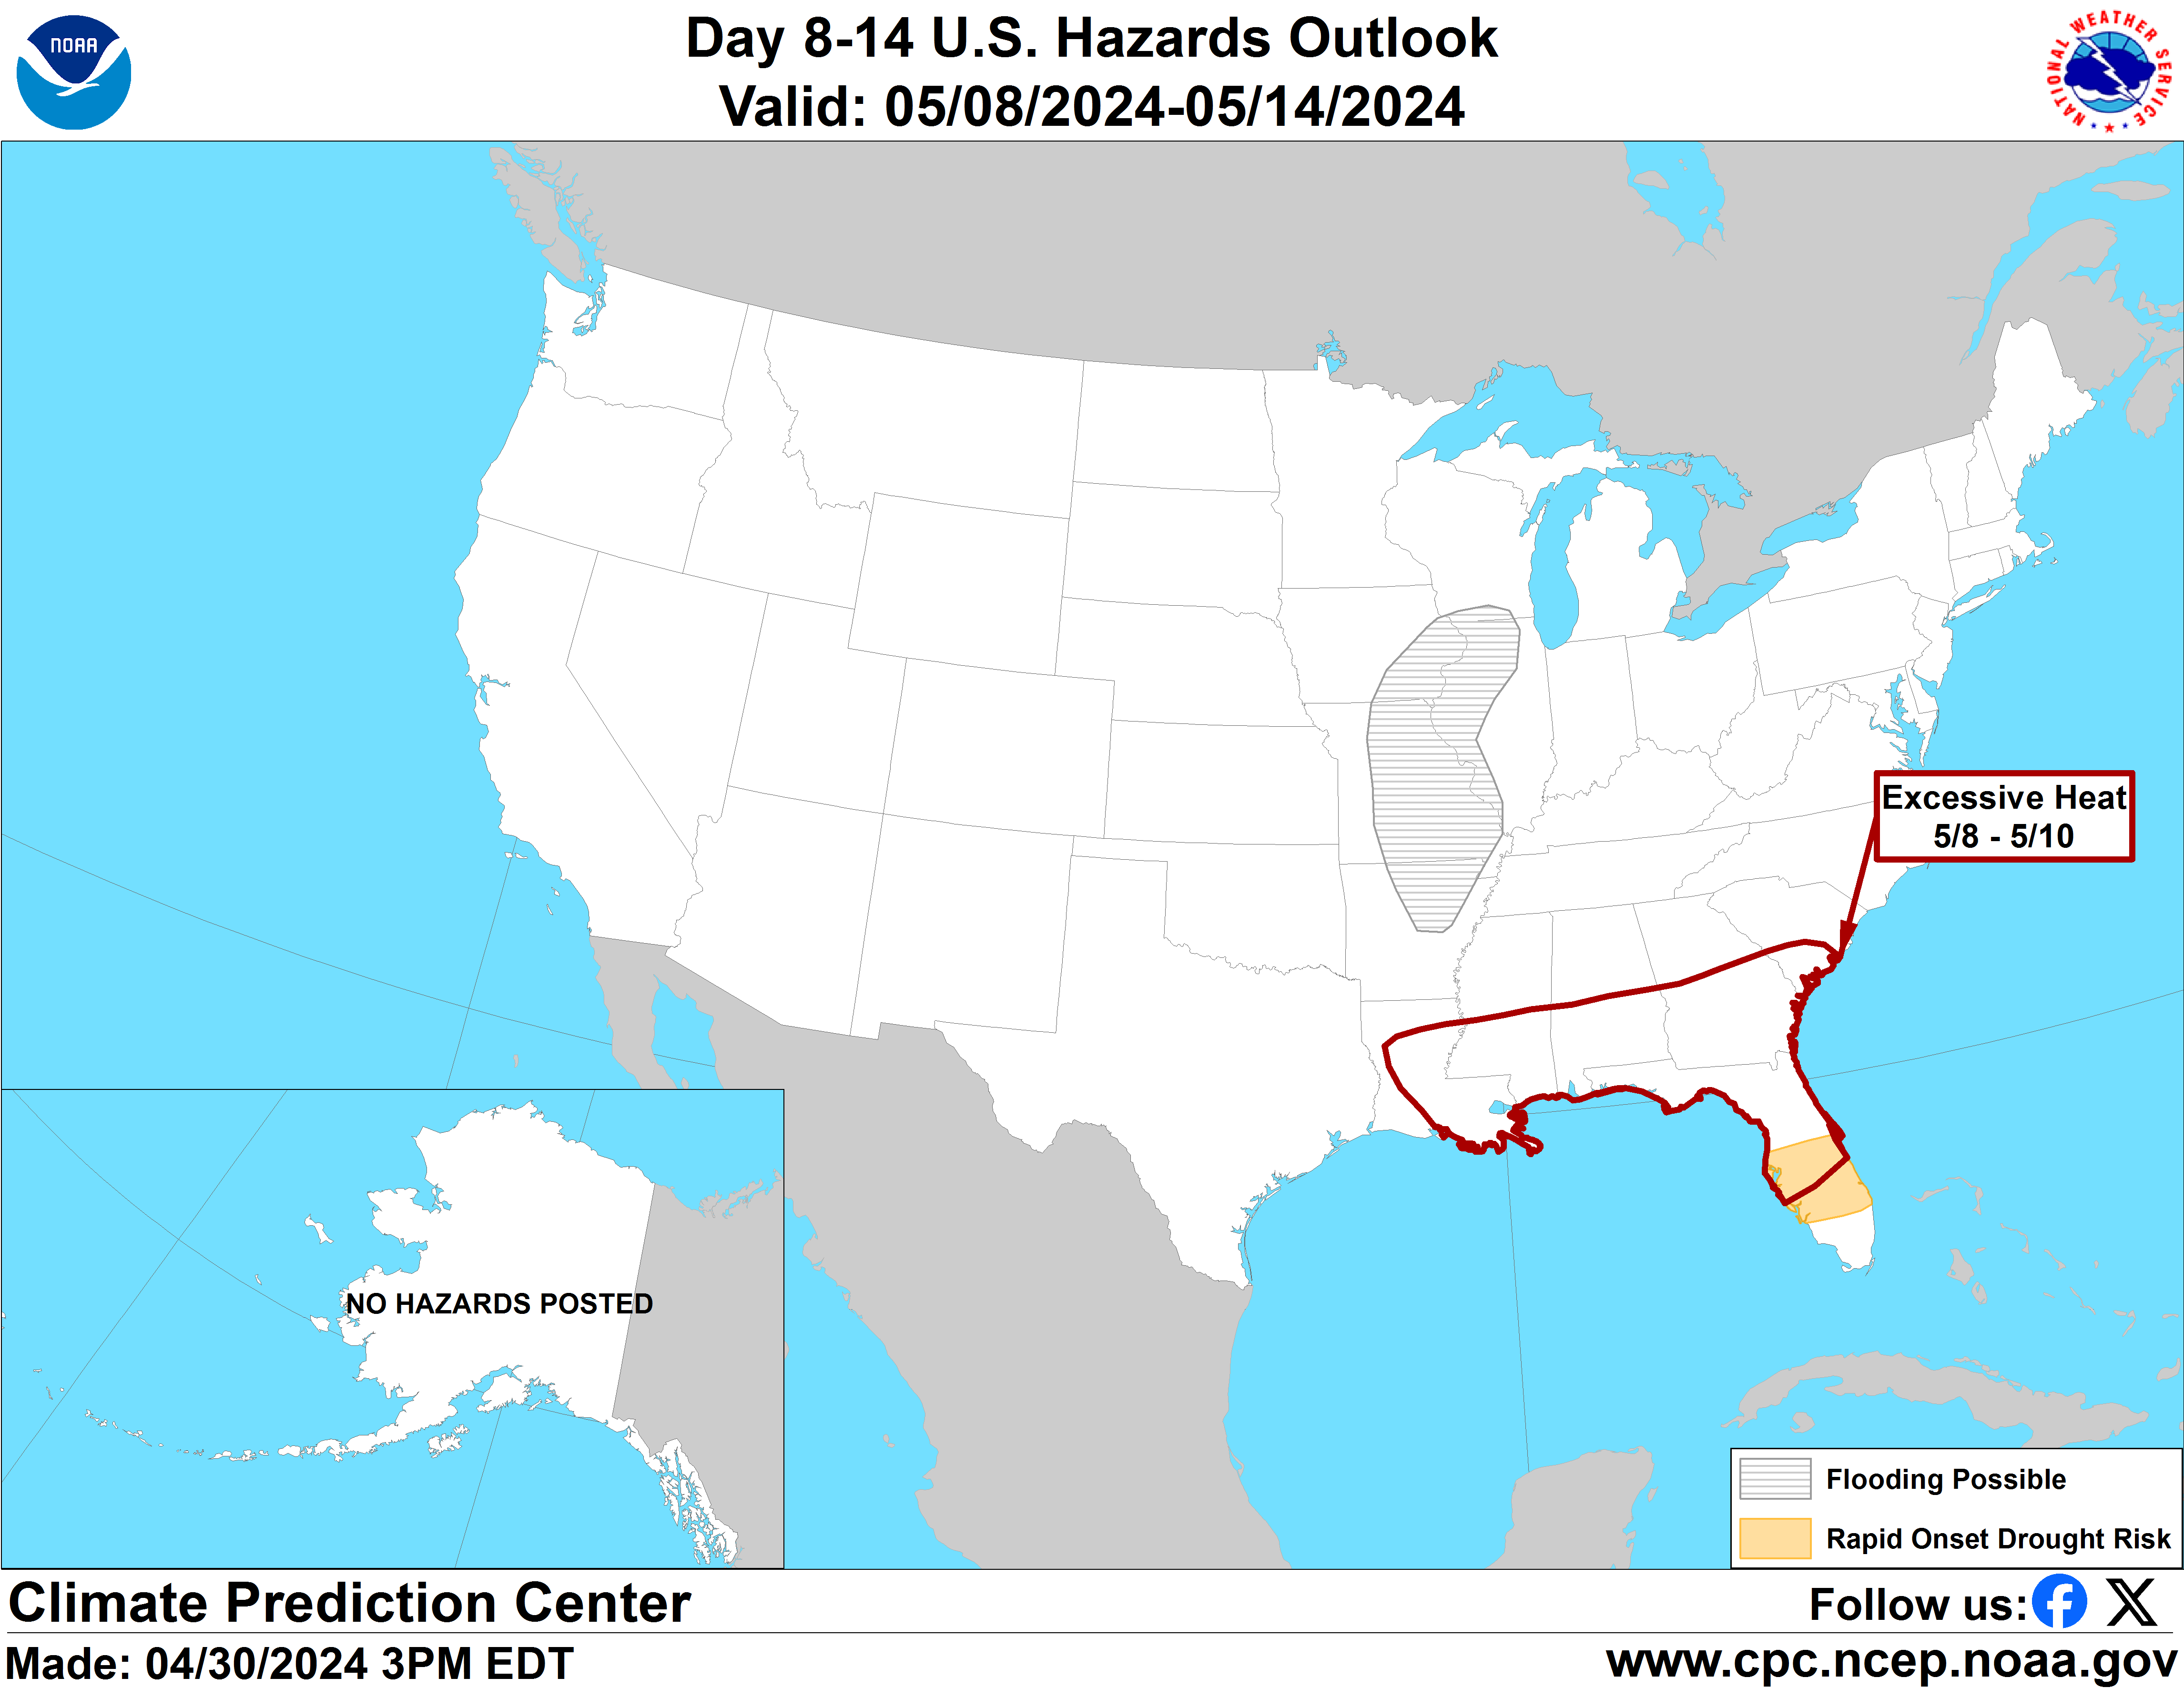 NWS Days 8-14 National Hazards Outlook